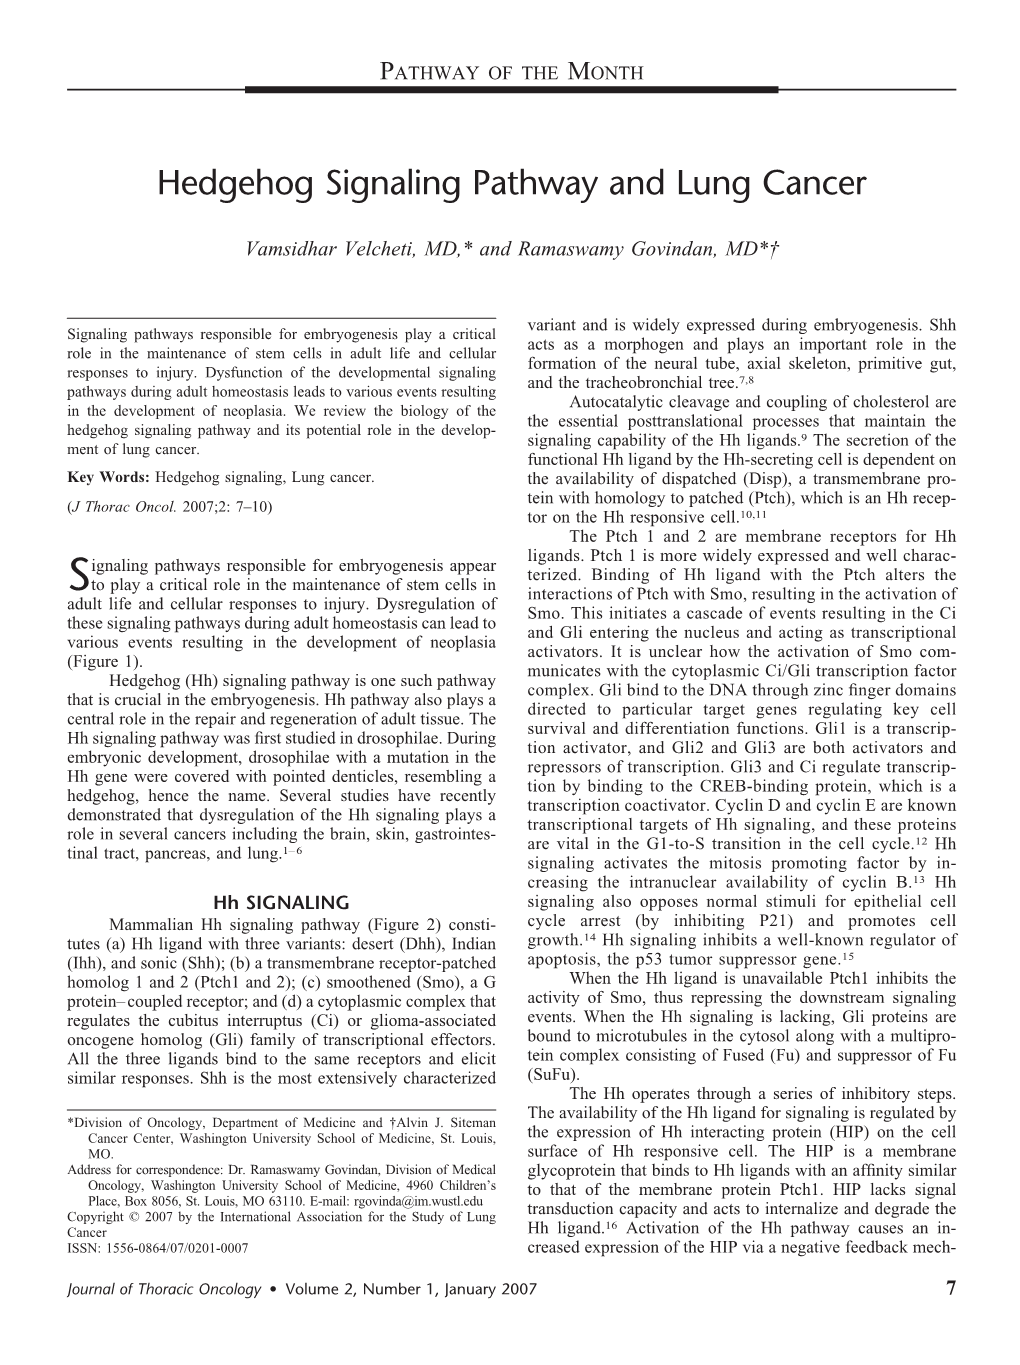 Hedgehog Signaling Pathway and Lung Cancer